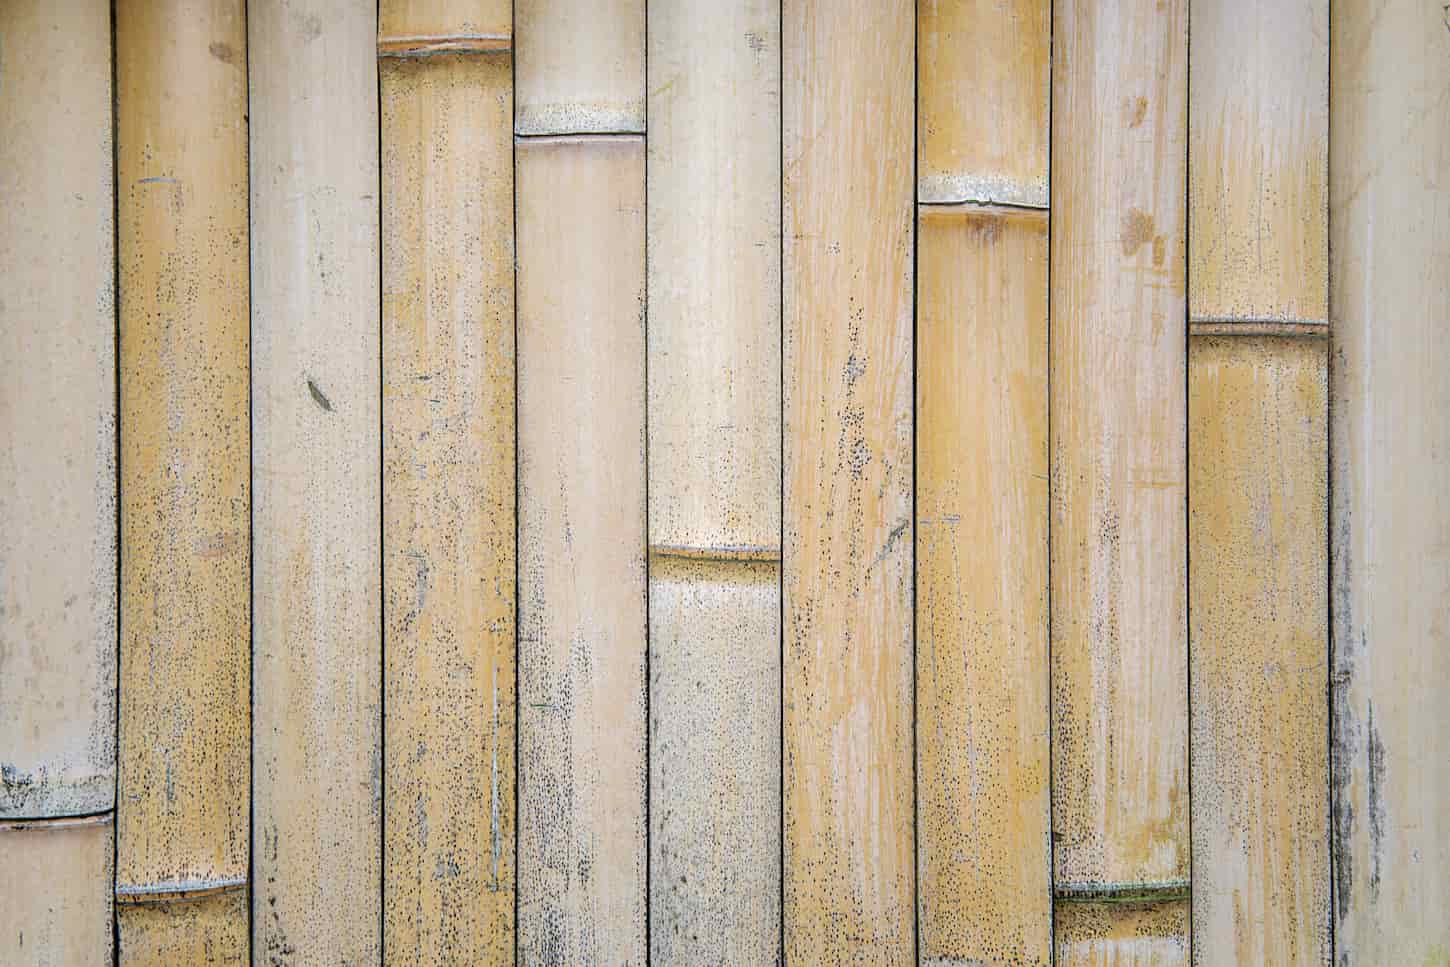 How Long Does a Bamboo Fence Last?